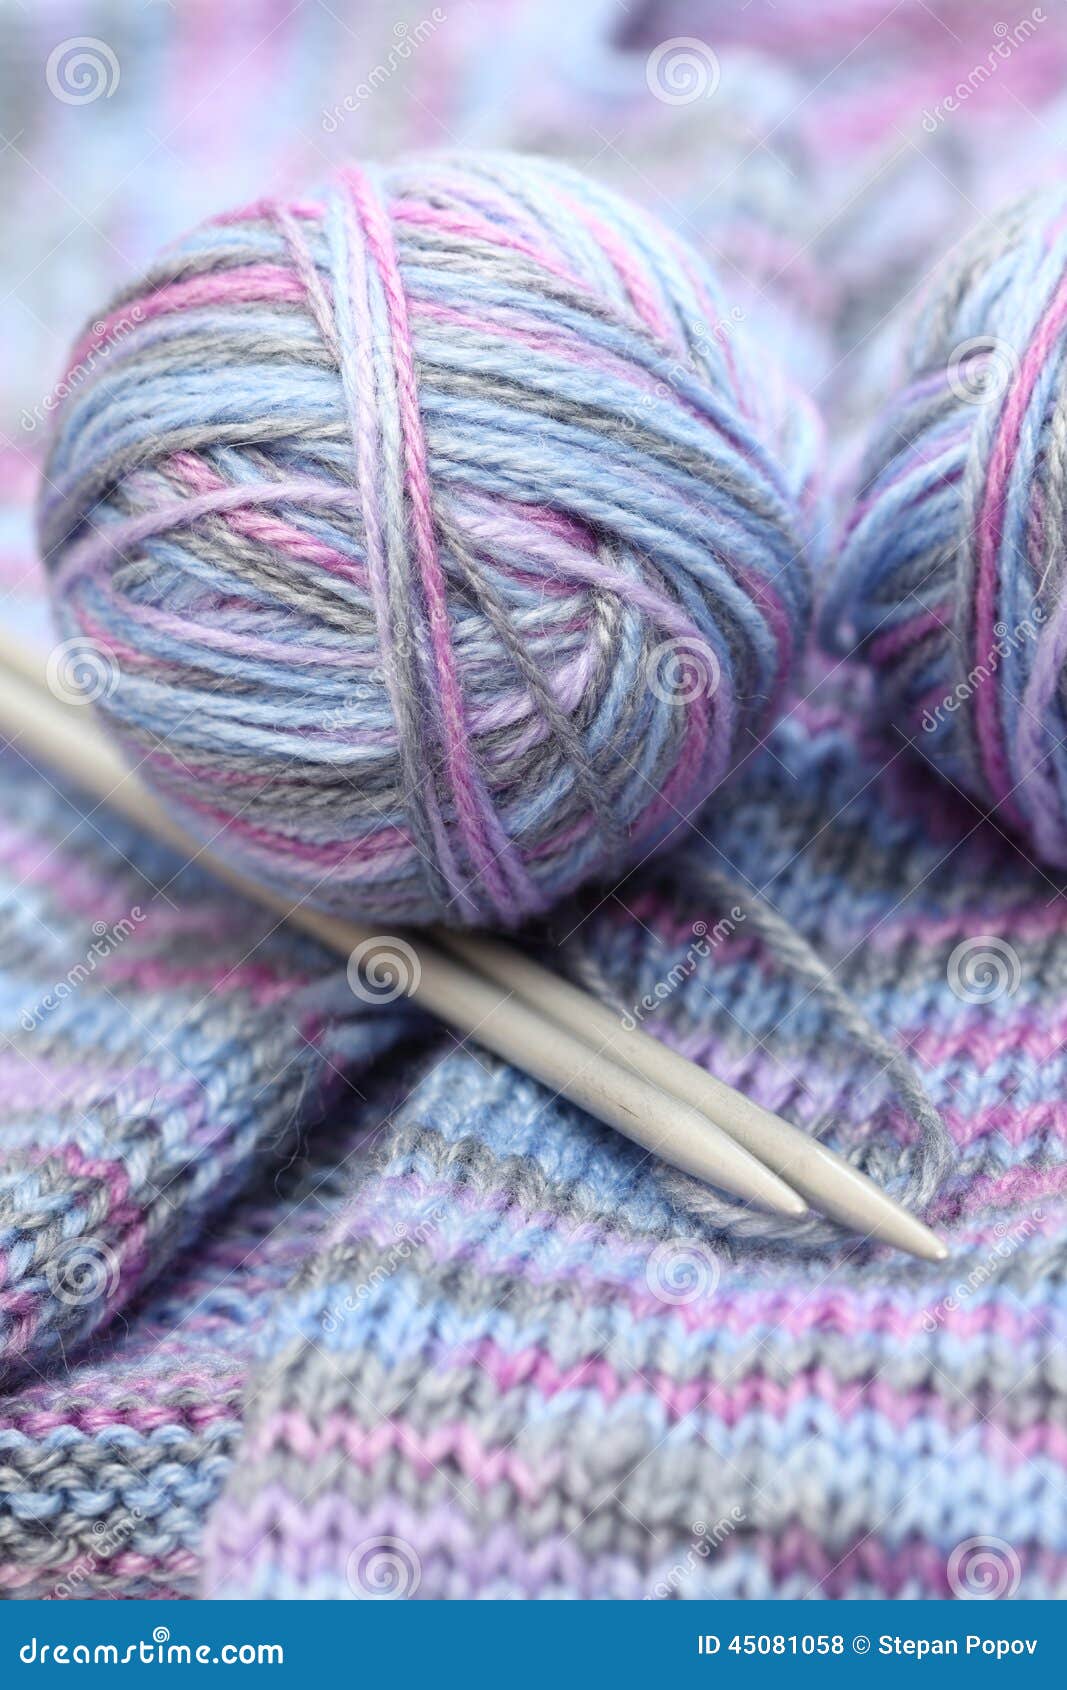 Knitting stock photo. Image of focus, objects, group - 45081058